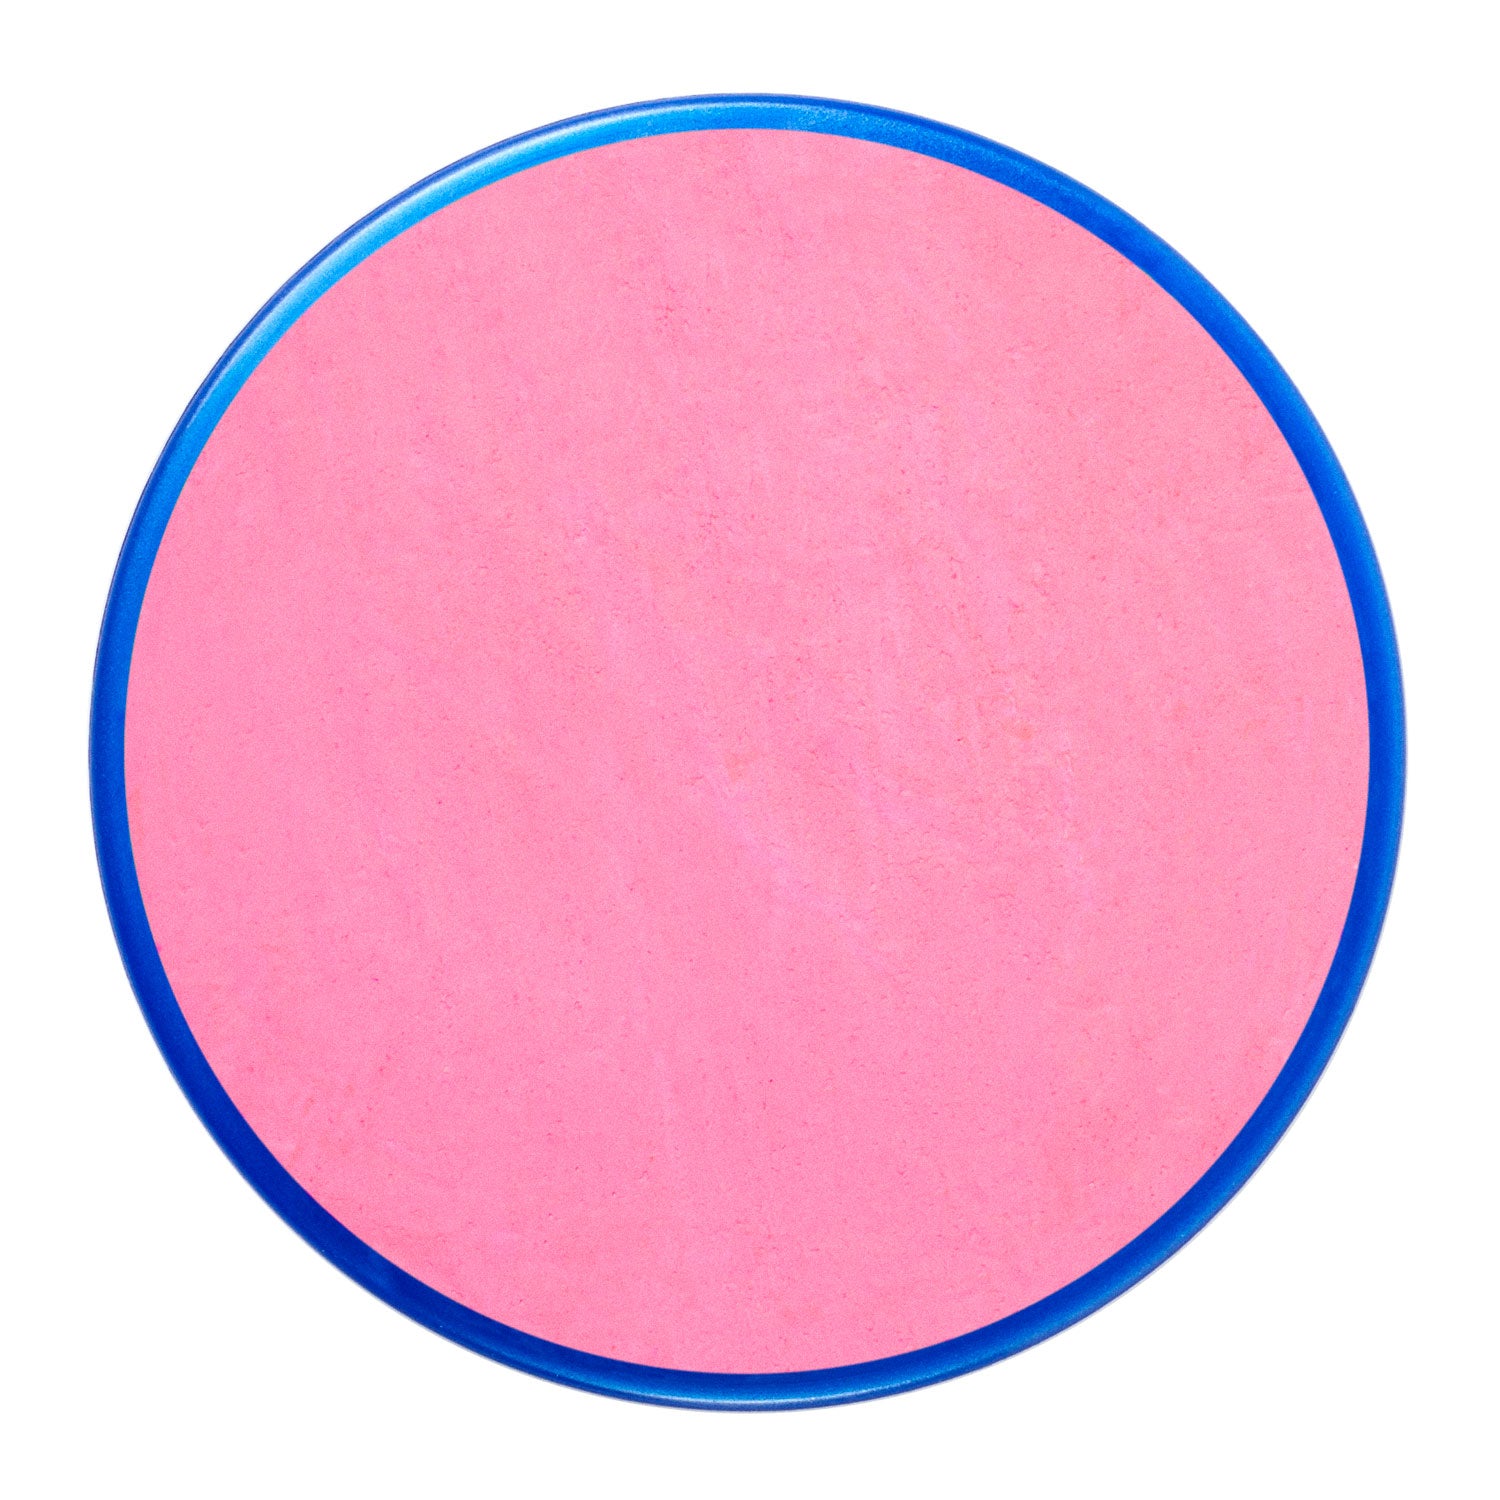 Snazaroo Face Paint - Pale Pink